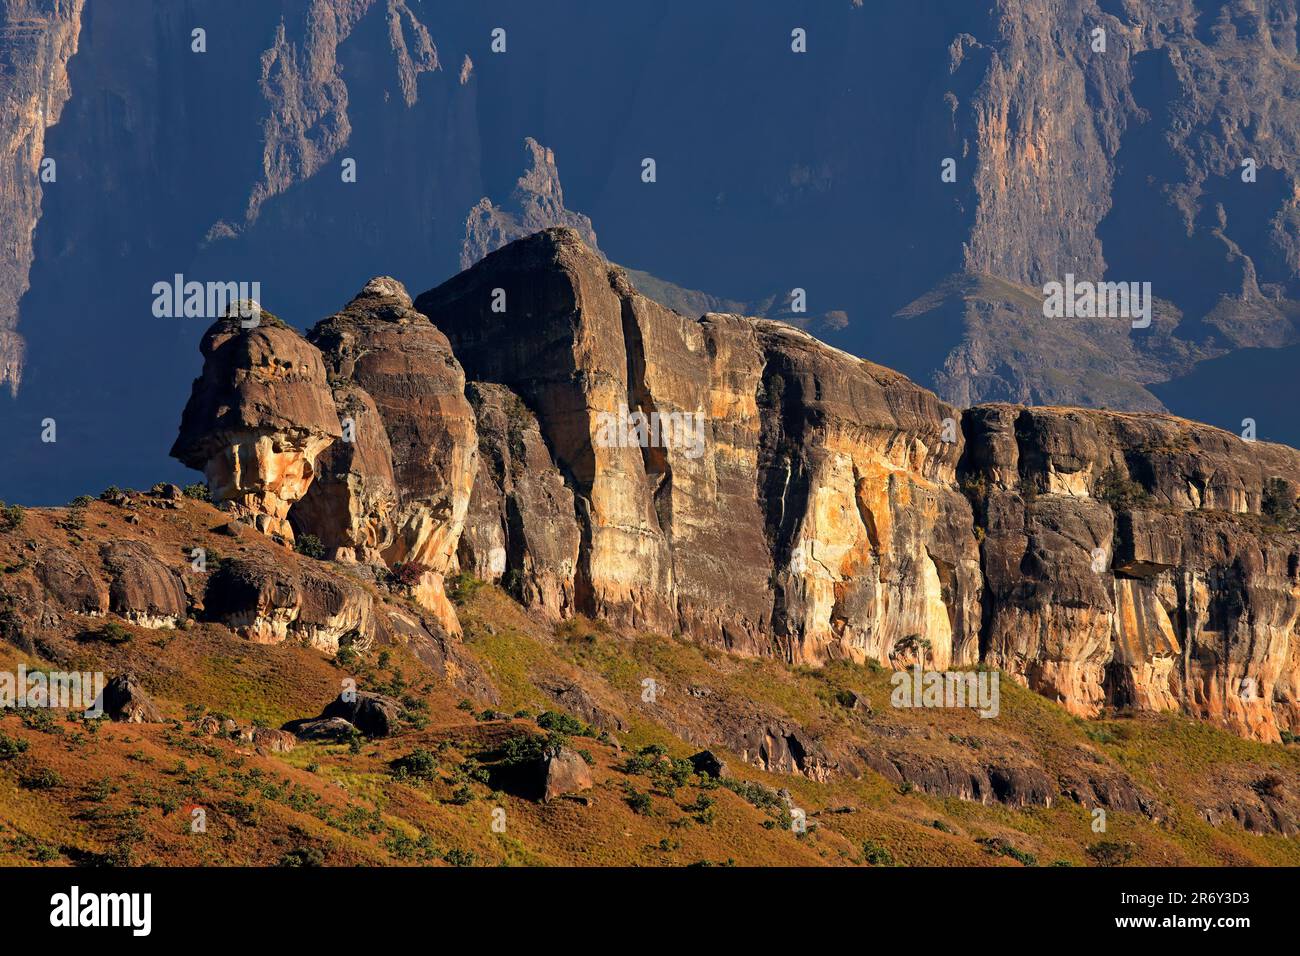 High peaks in the Drakensberg mountains, Royal Natal National Park, South Africa Stock Photo